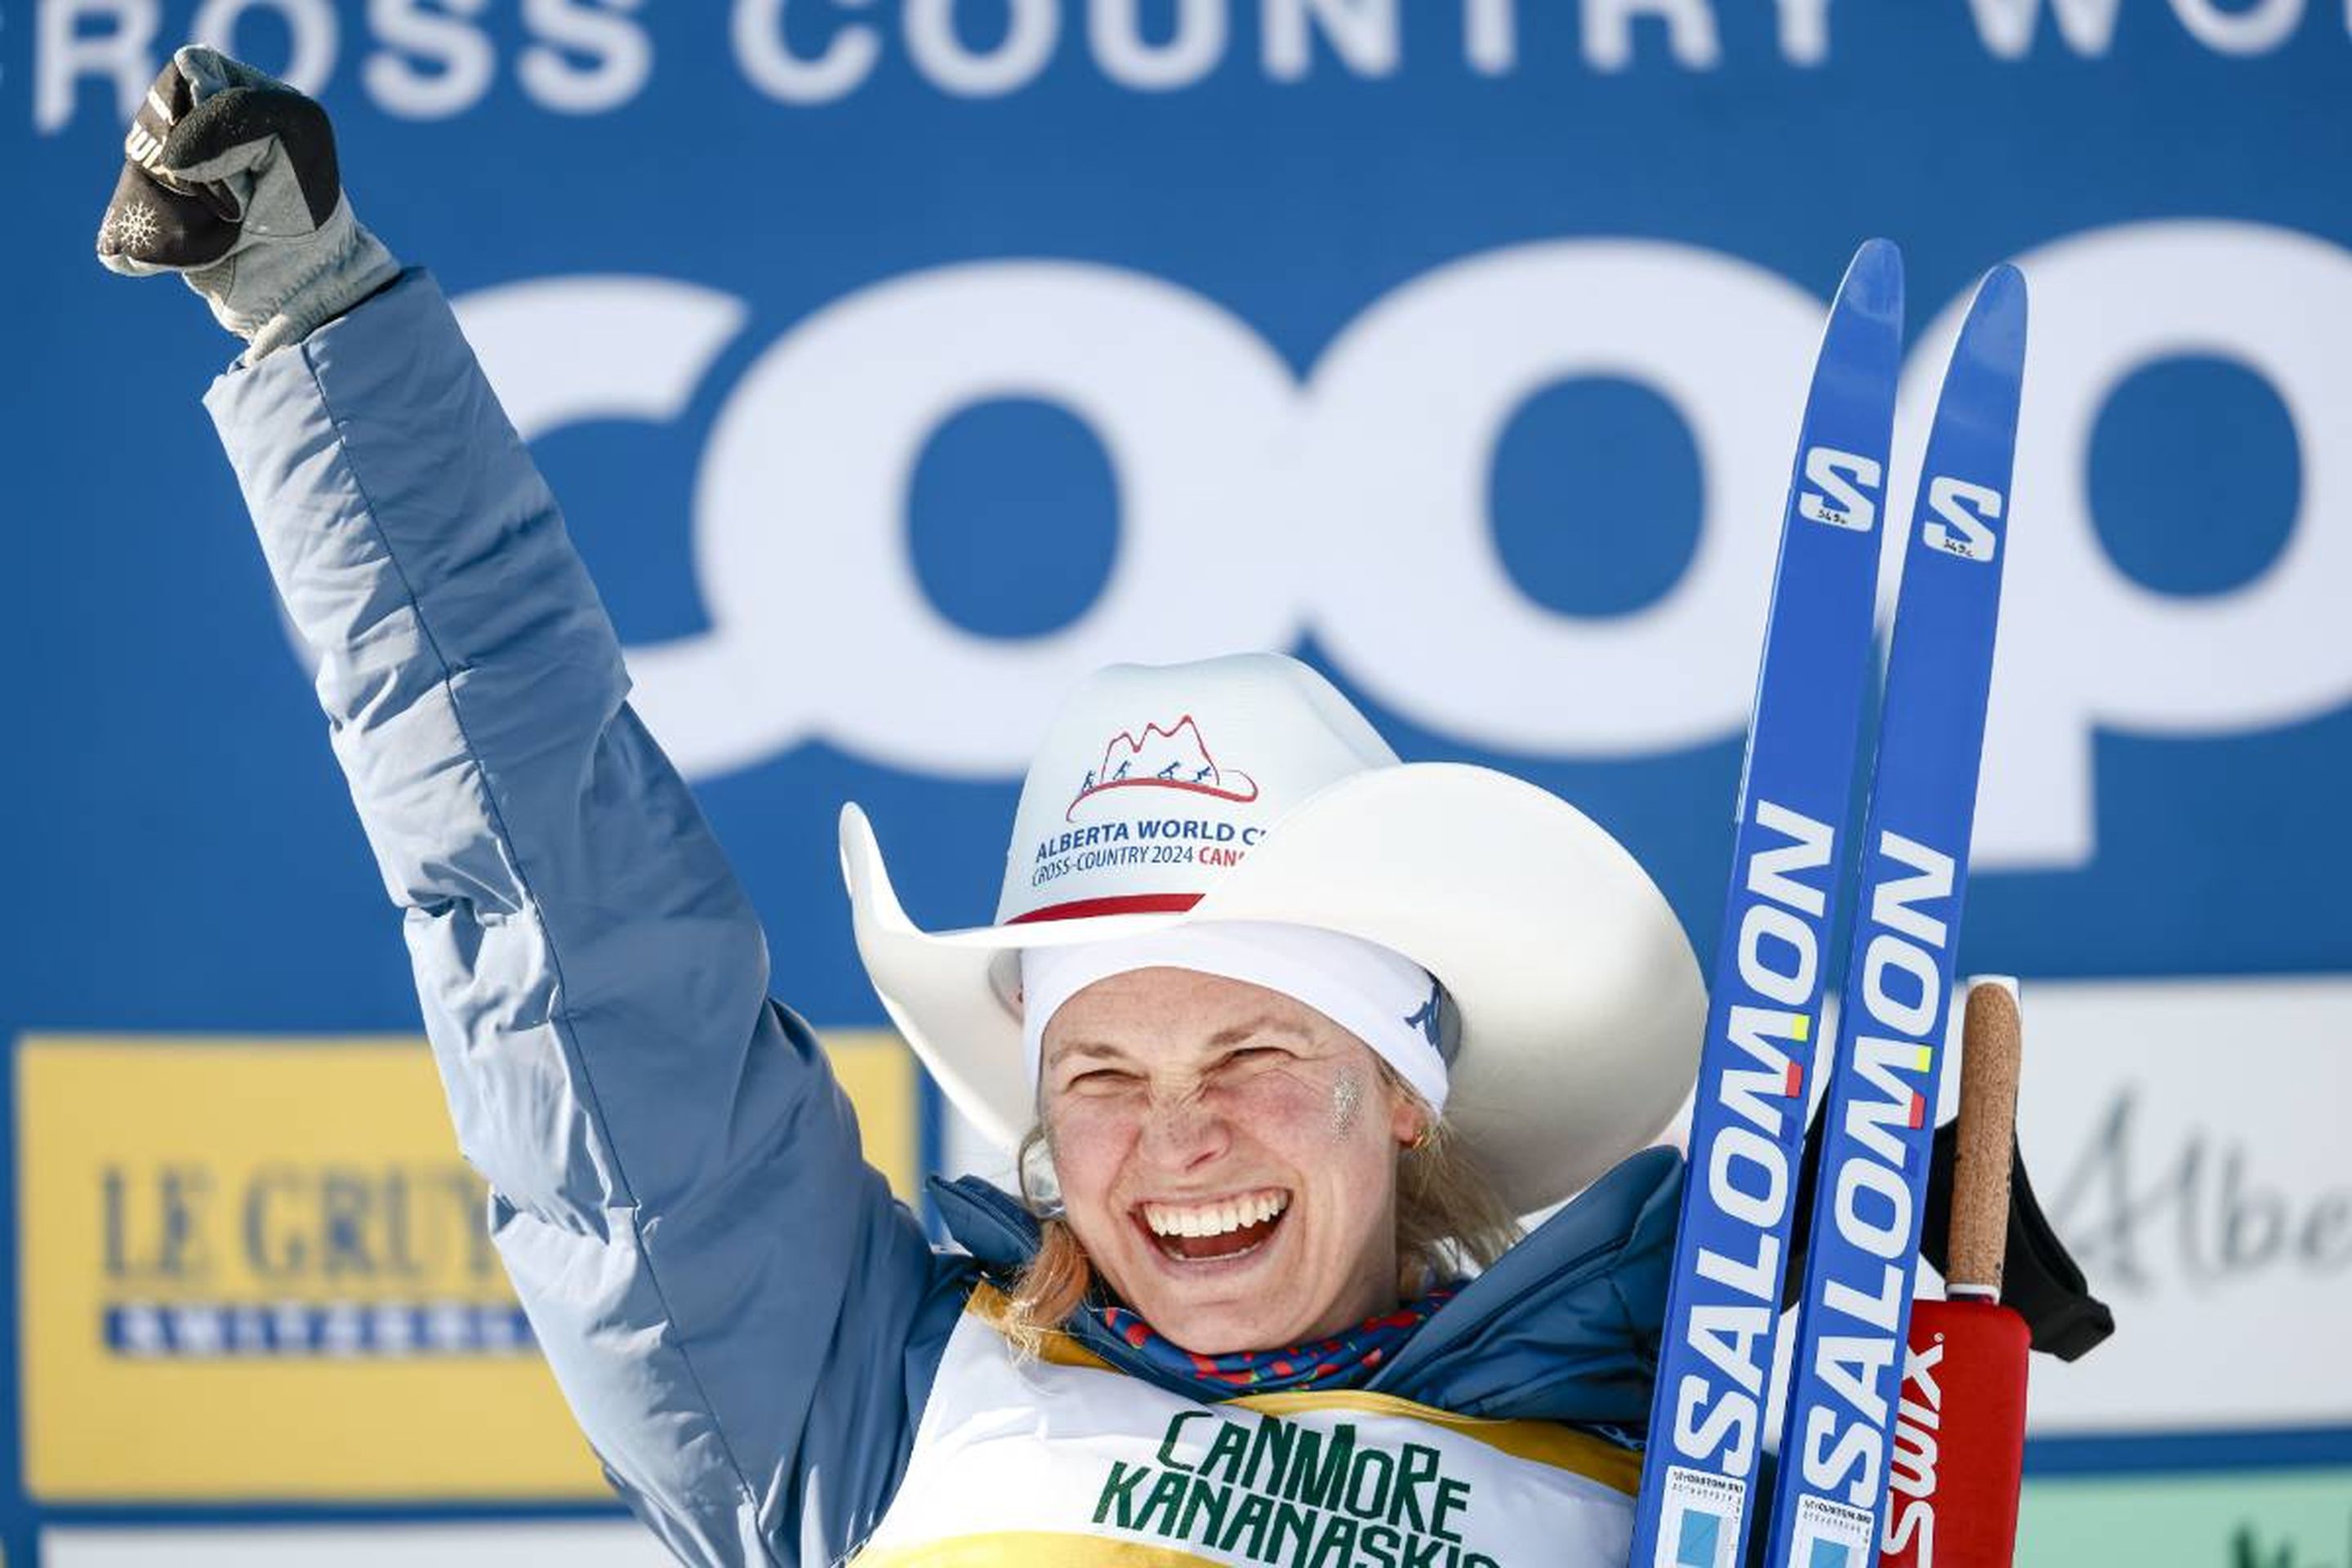 Jessie Diggins celebrating with a local cowboy hat after winning the 15km mass start free in Canmore, Canada © NordicFocus